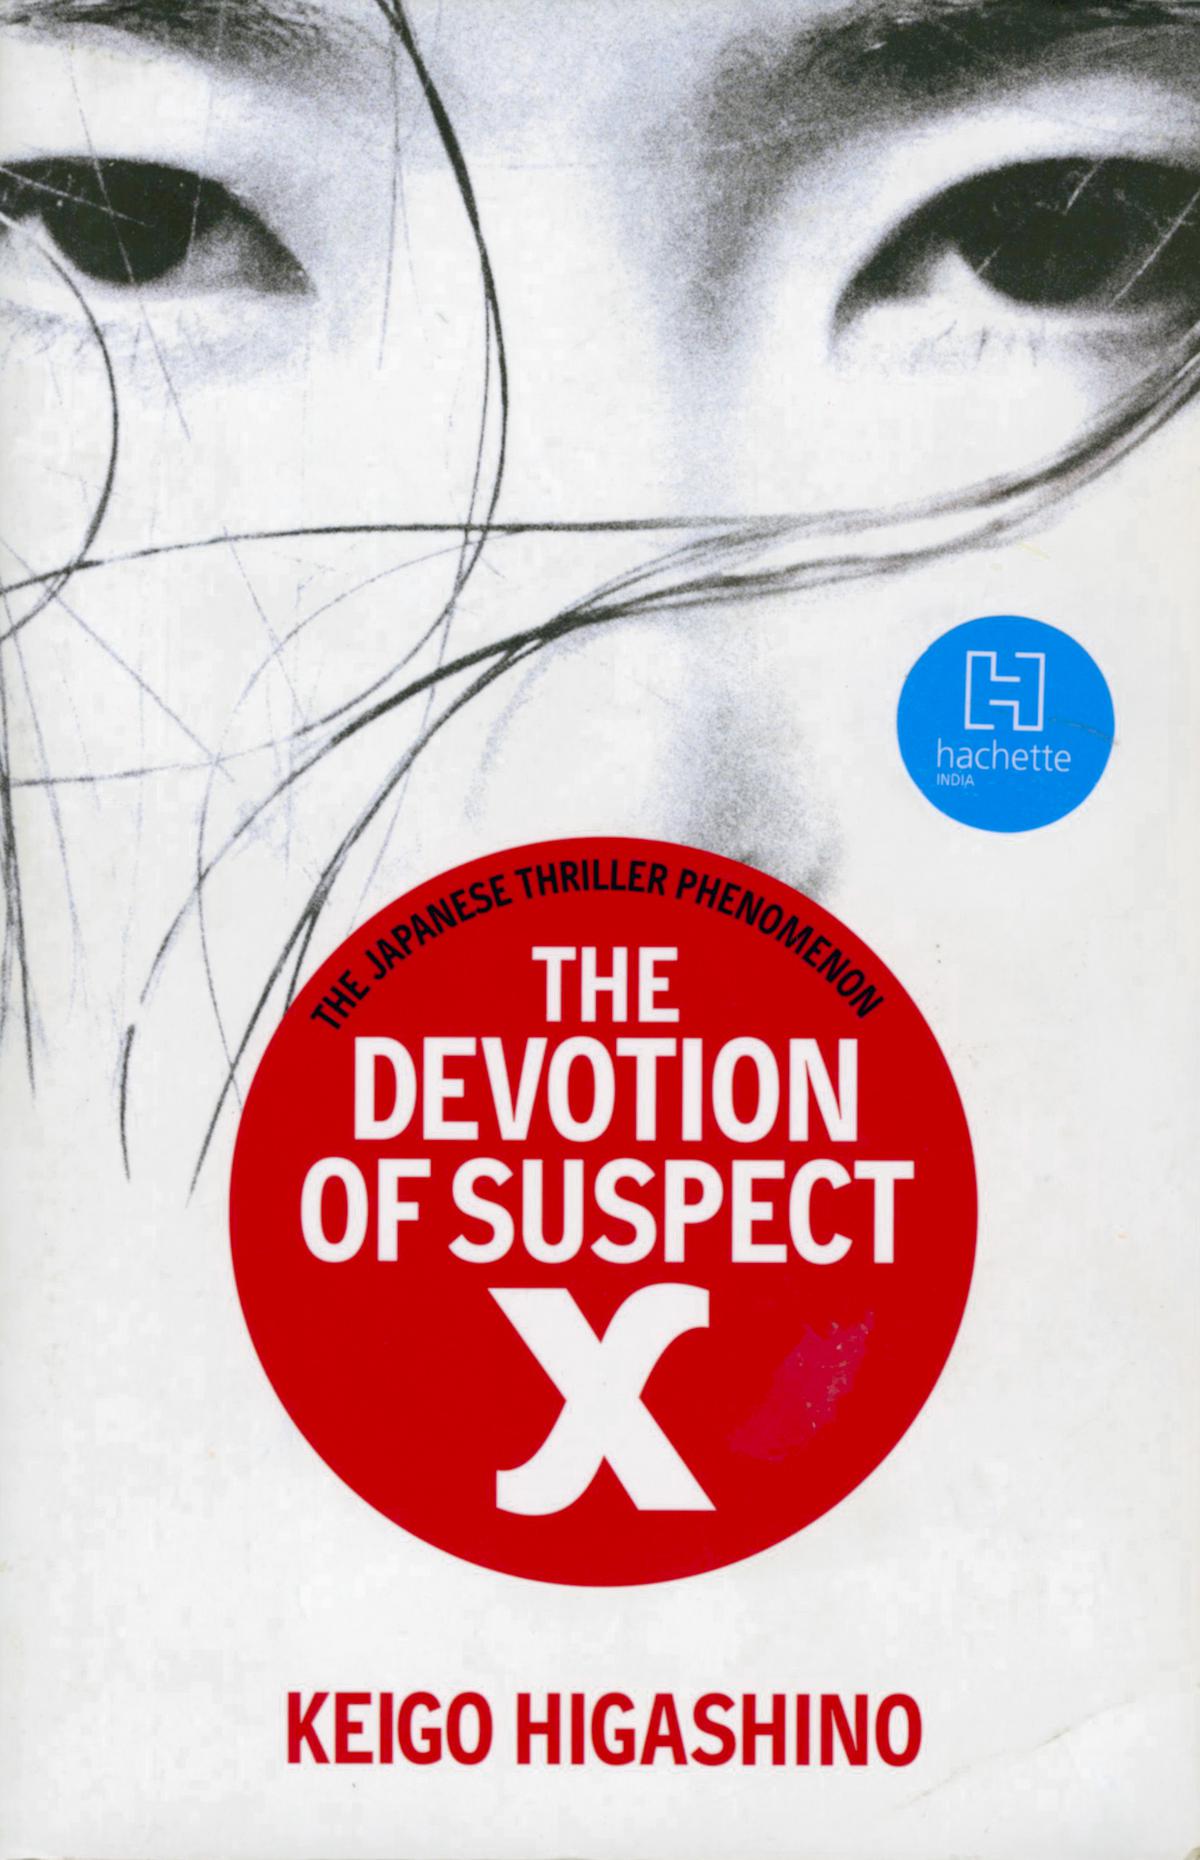 Japanese thriller ‘The Devotion of Suspect X’ by Keigo Higashino is widely believed to be the inspiration for the ‘Drishyam’ films.